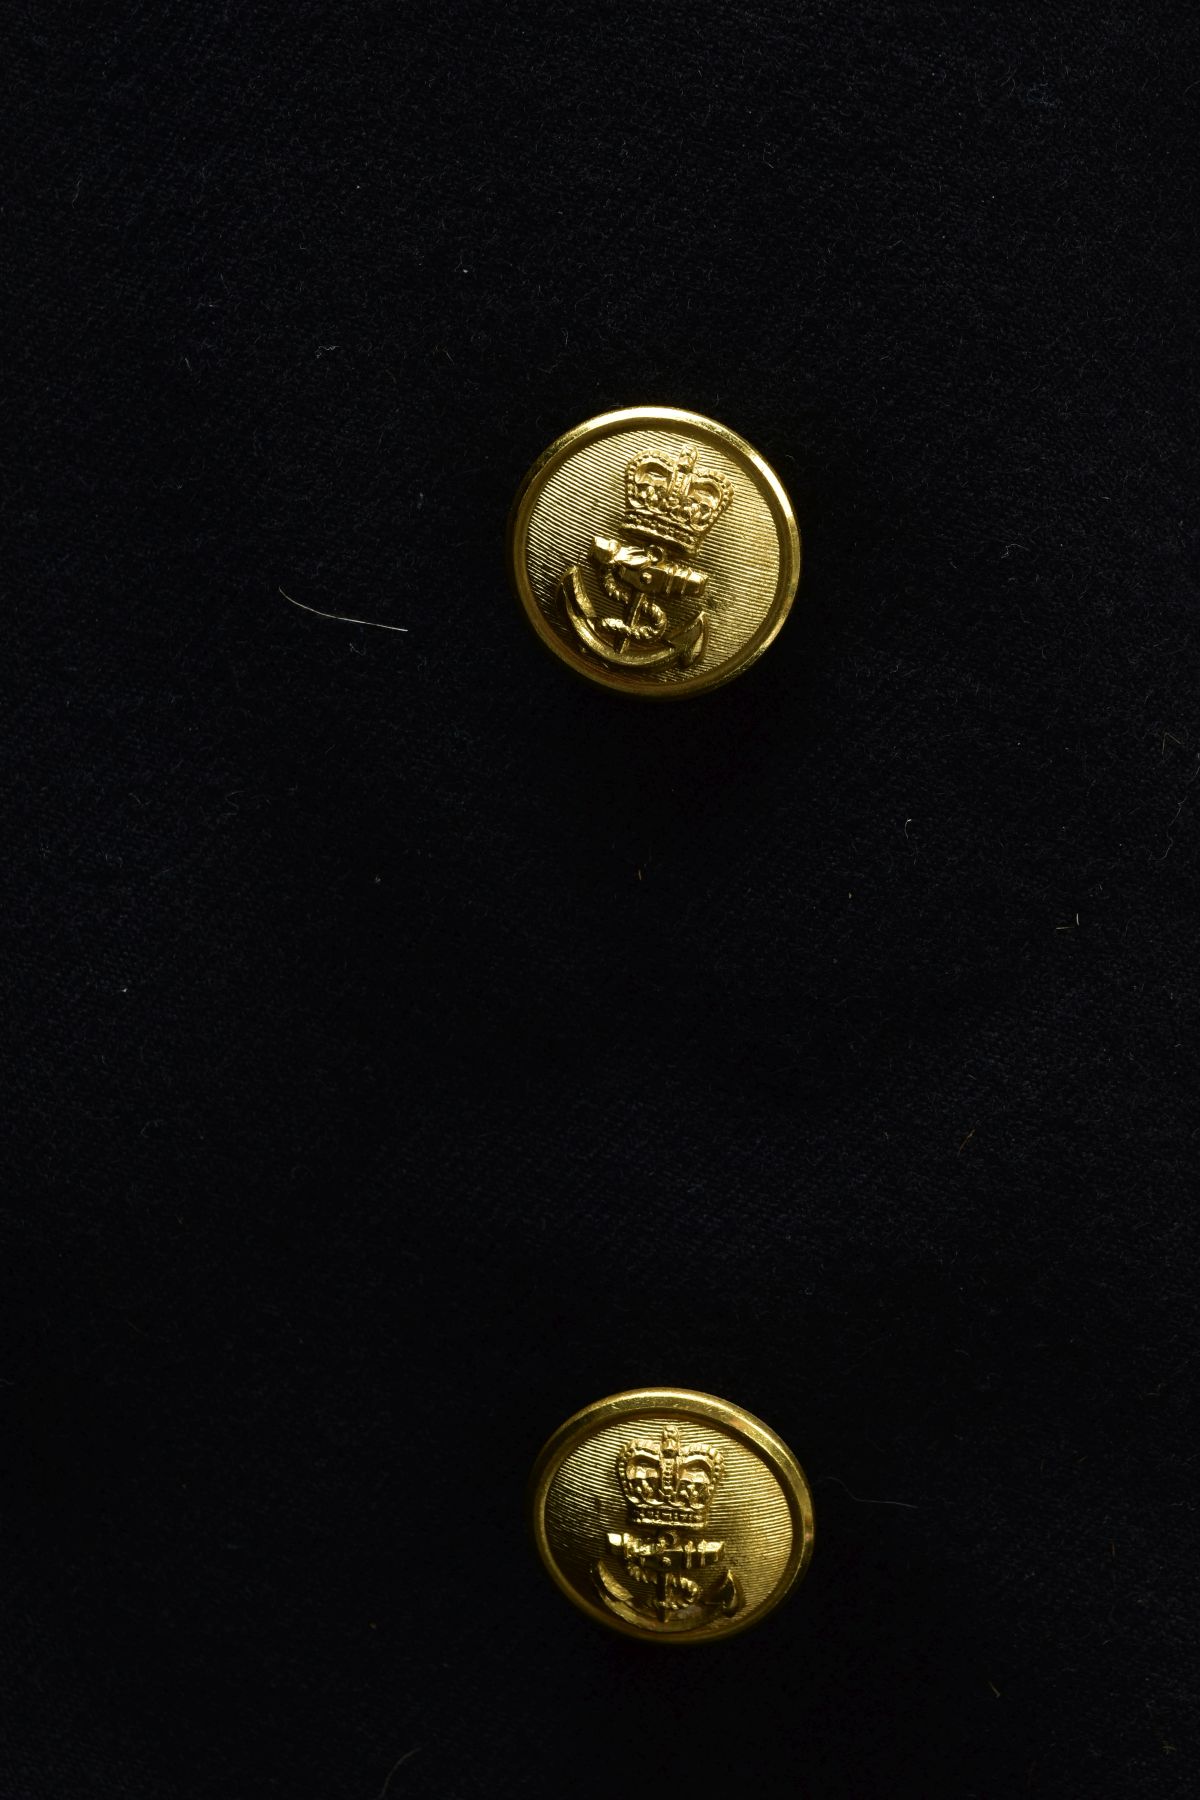 A ROYAL NAVY DRESS UNIFORM JACKET AND TROUSERS, with Rank & Crown patch to left sleeve and AL - Image 5 of 10